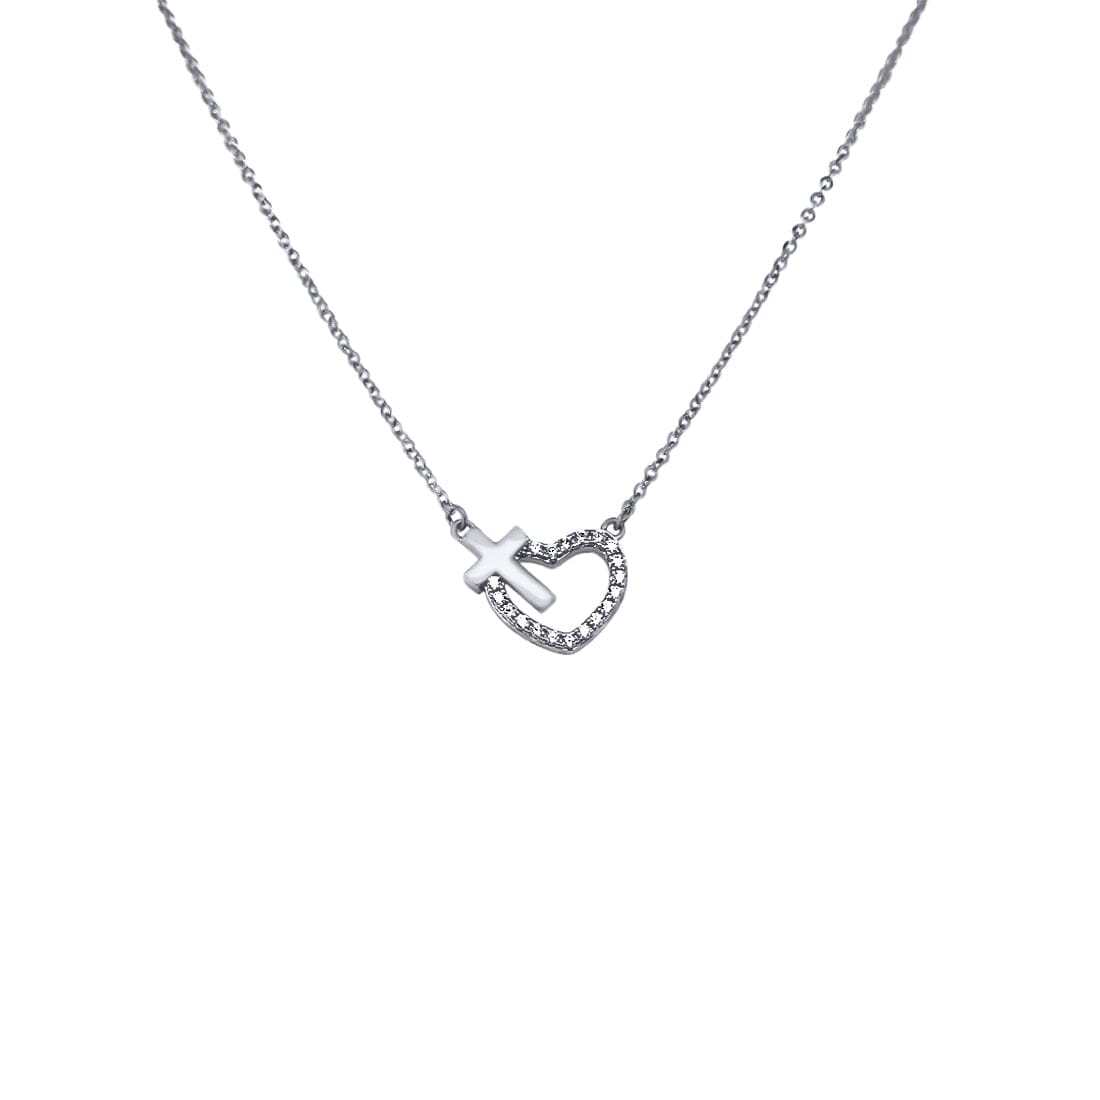 45cm Cross and Open Heart Necklace with Cubic Zirconia in Sterling Silver Necklaces Bevilles 